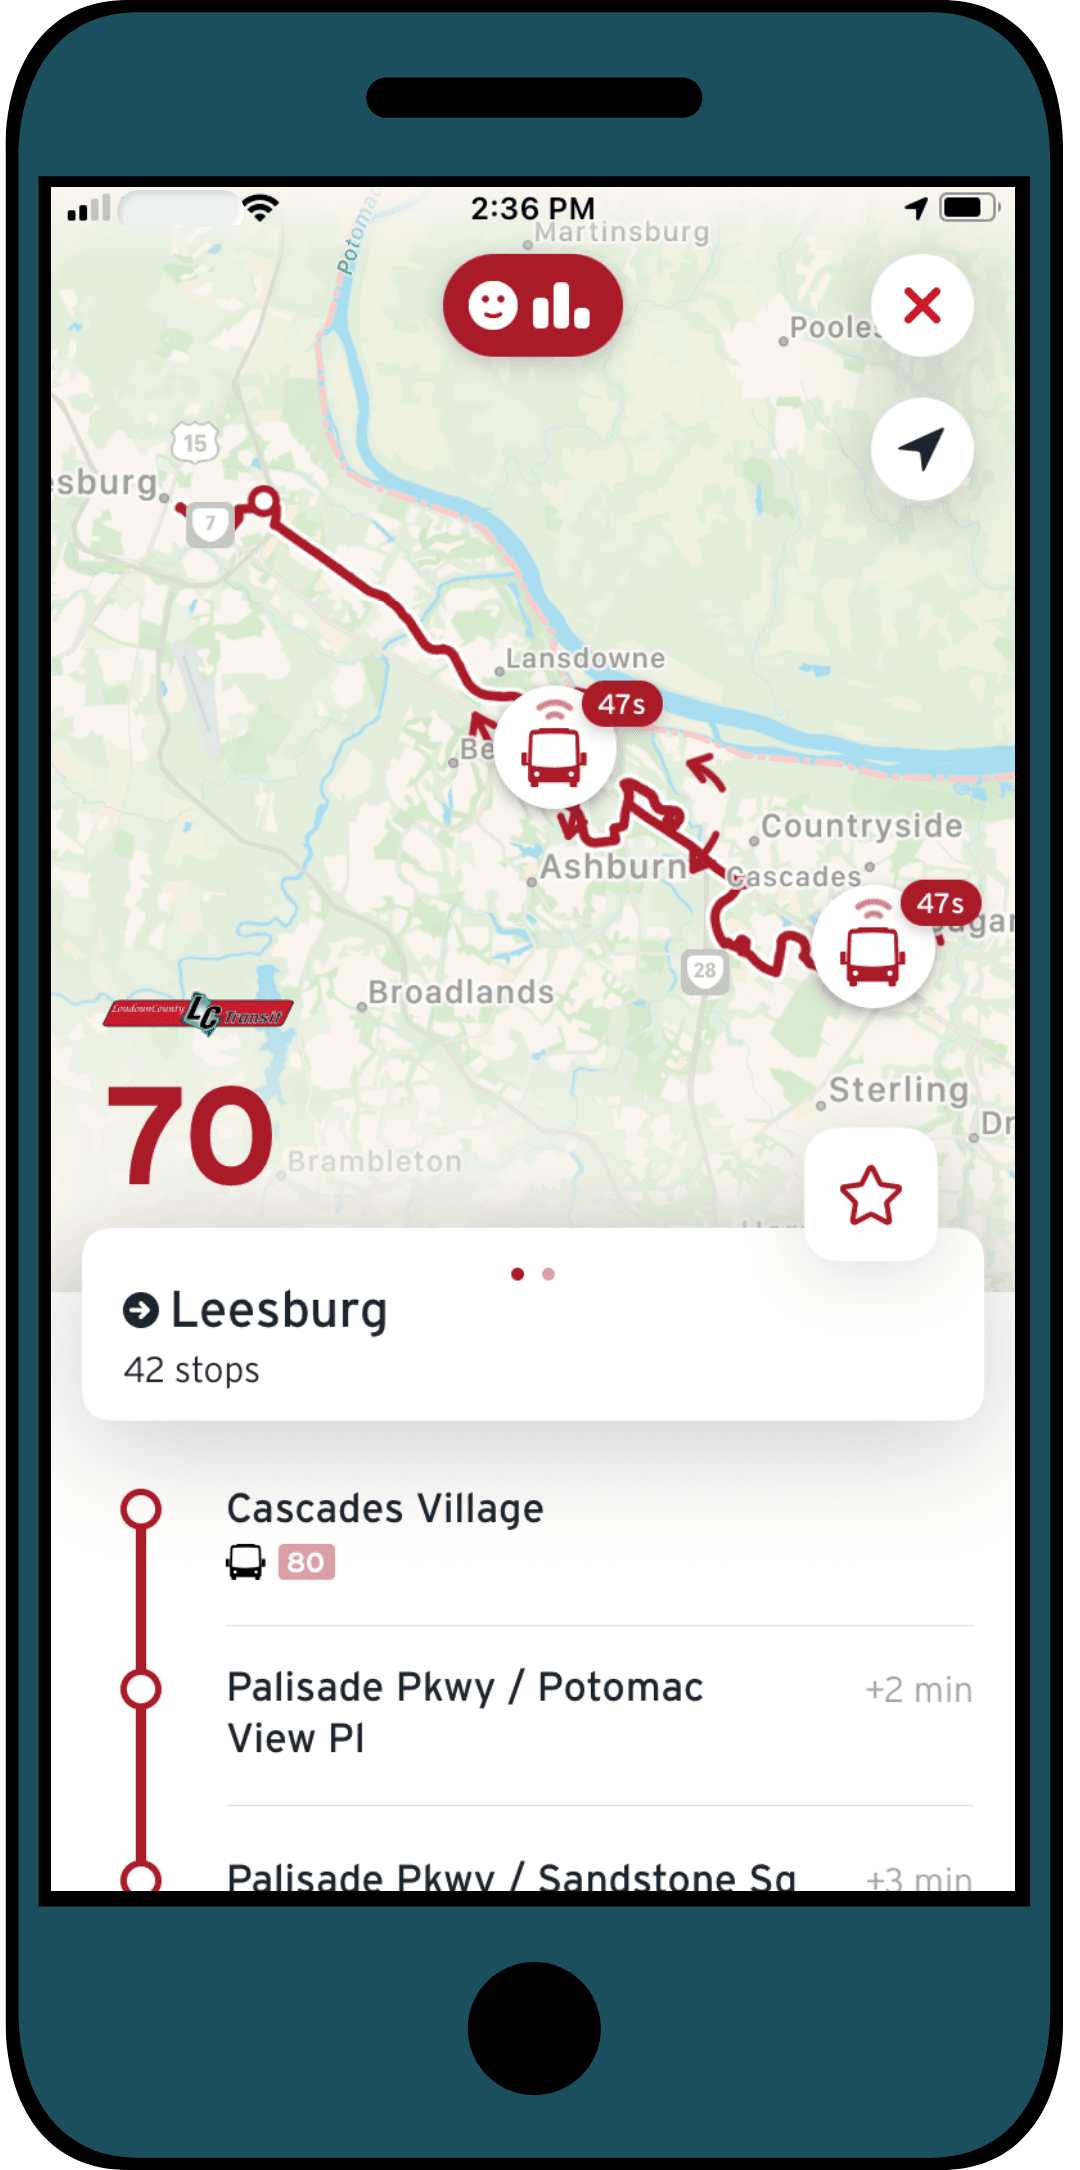 Cell Image of LC Transit Route in Transit app